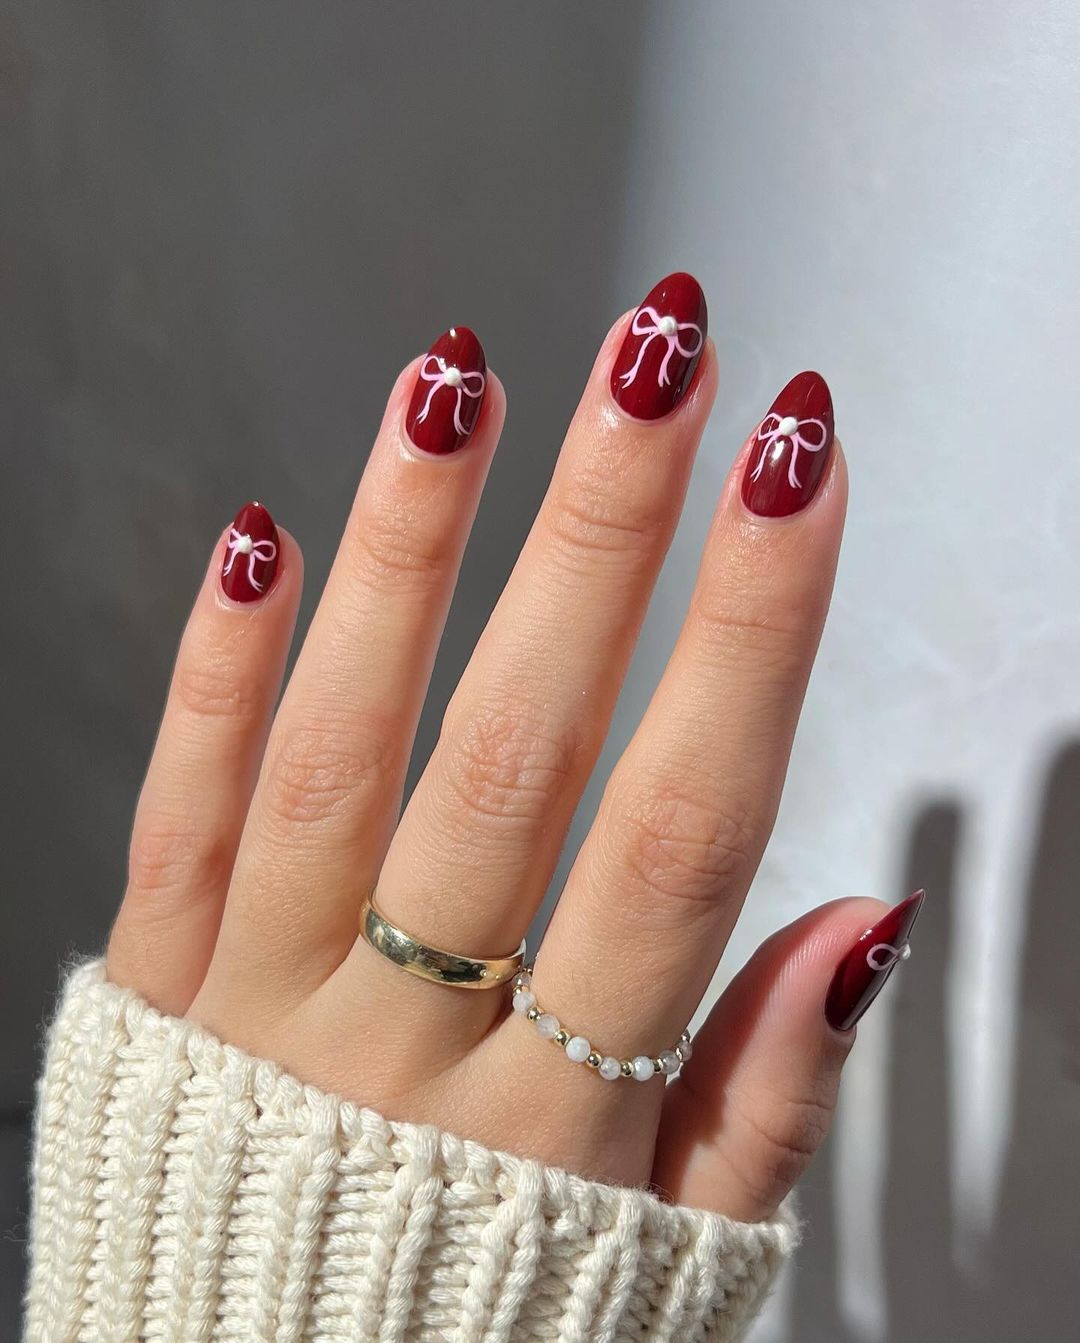 Coquette red nails with ribbon details